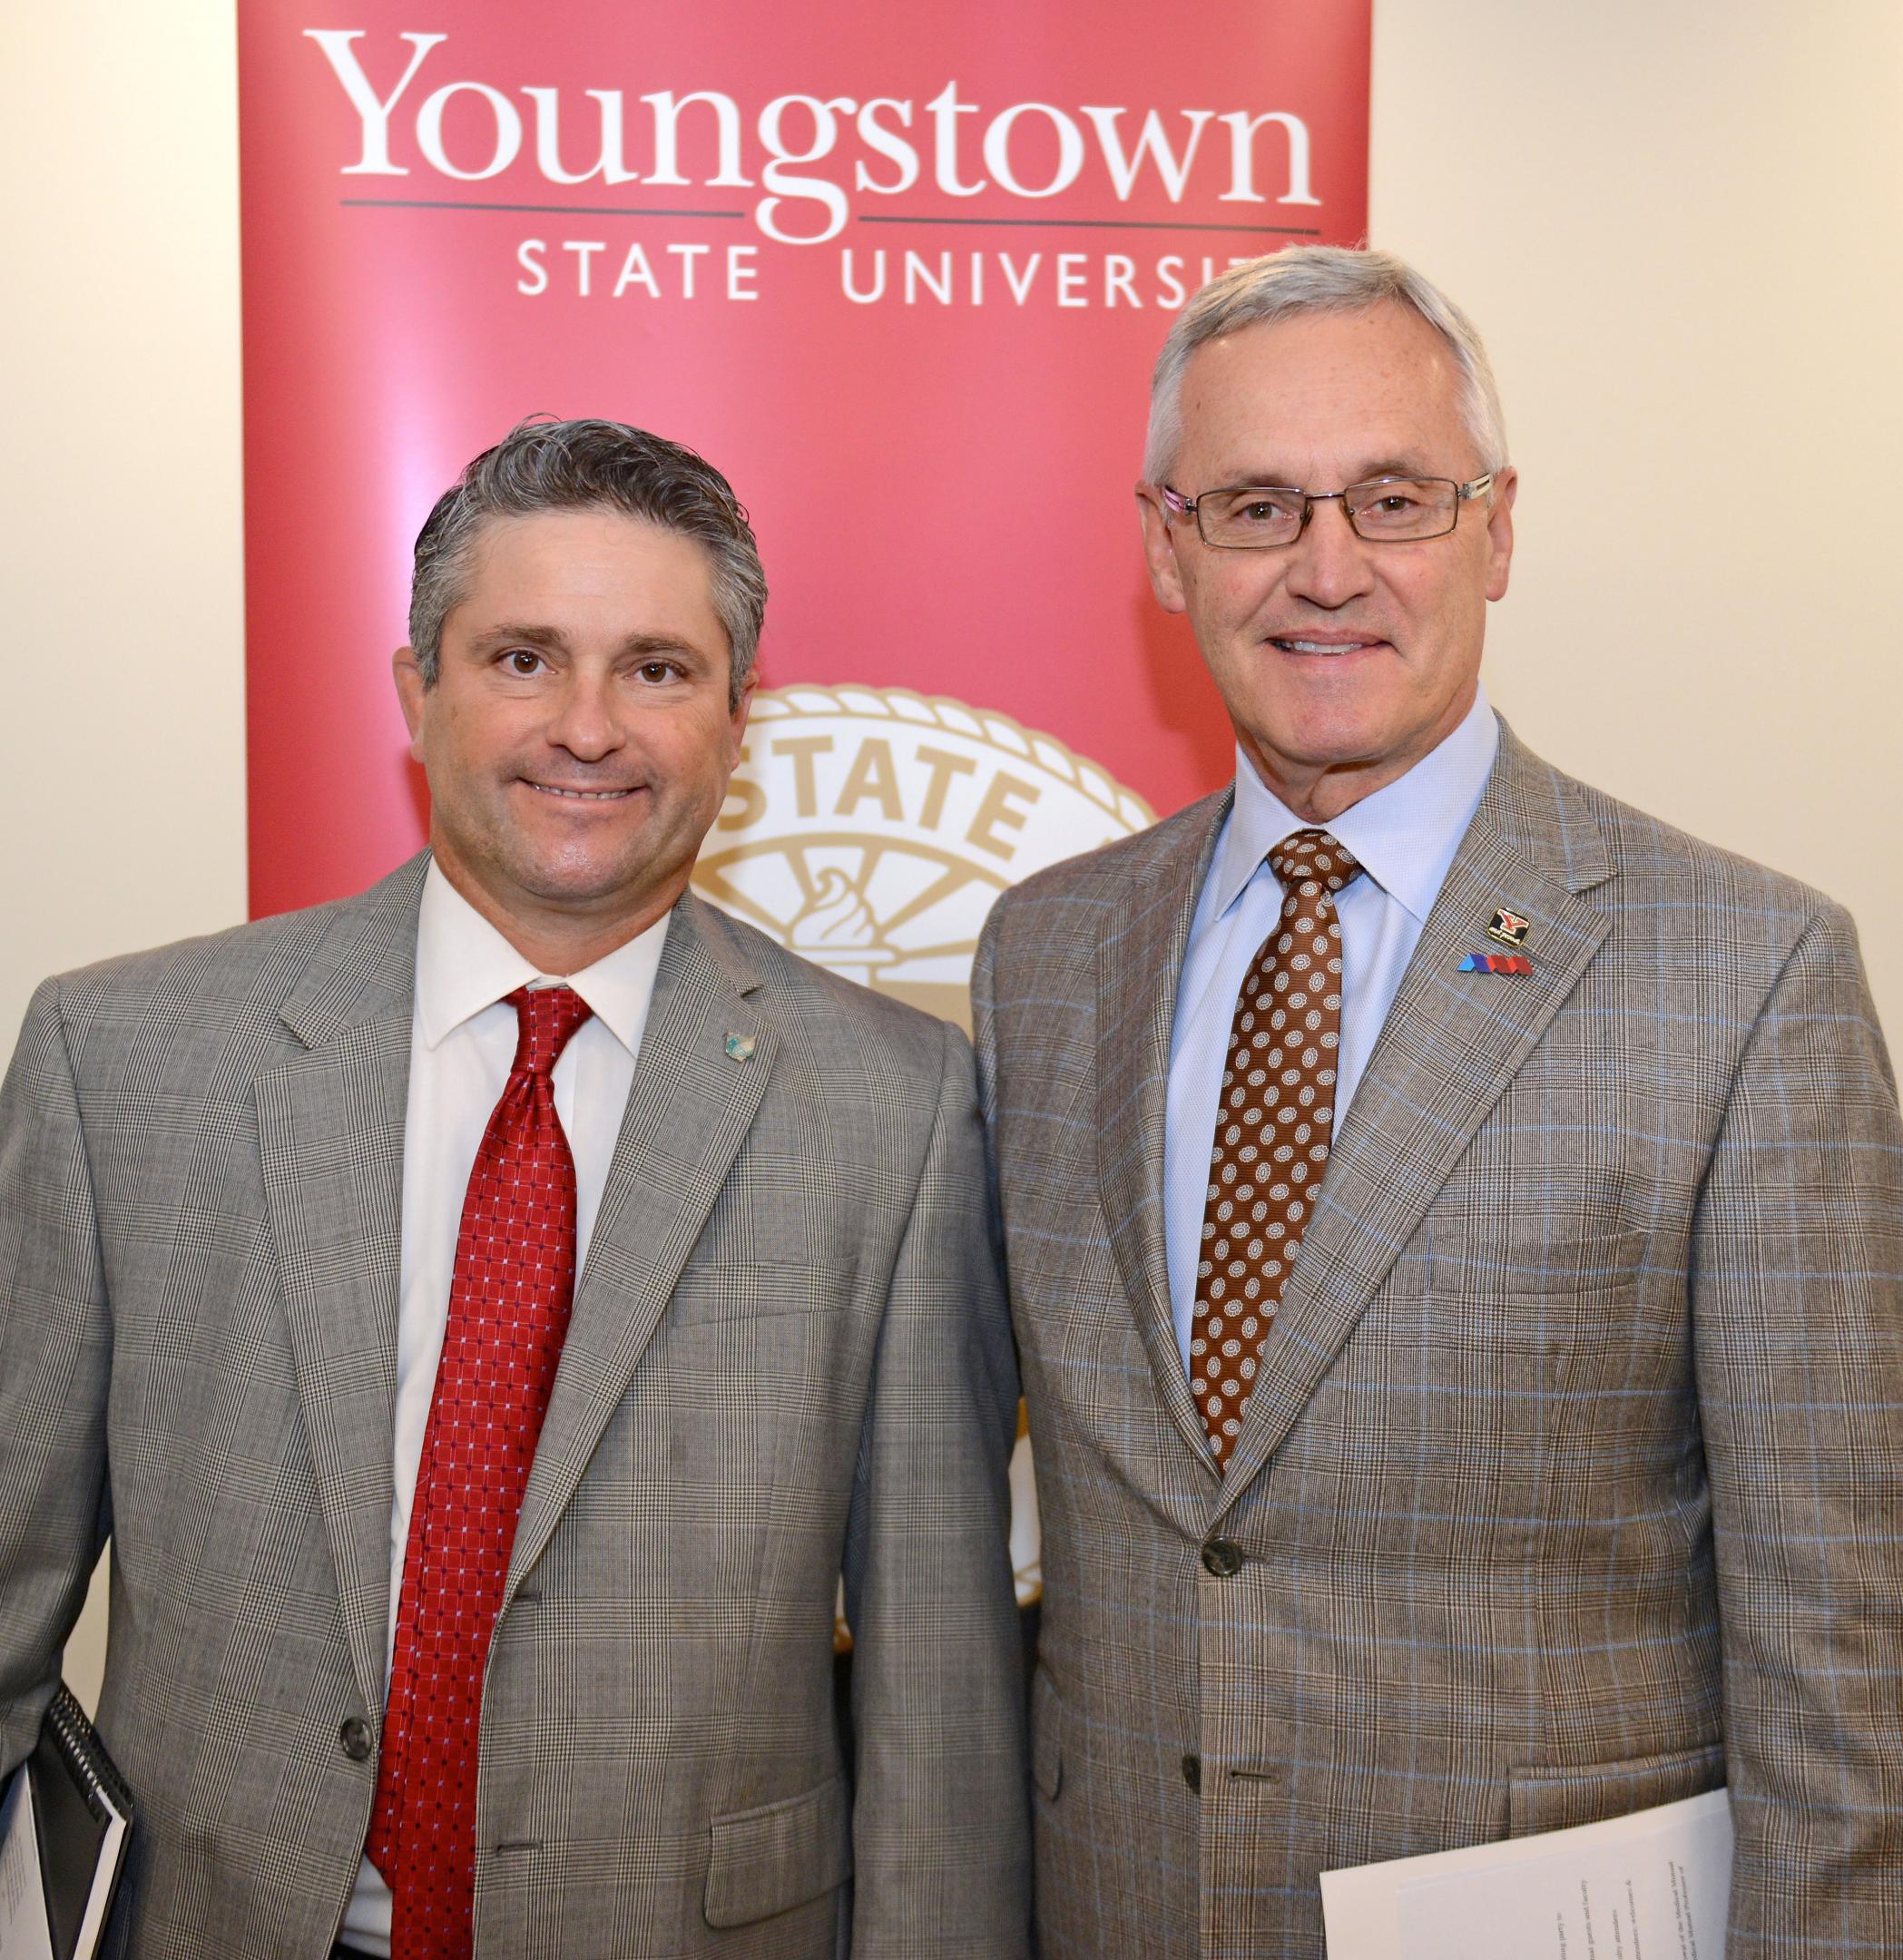 Ben Stoffer, left, Medical Mutual regional vice president, Canton, Youngstown and Southeast Region, and YSU President Jim Tressel.